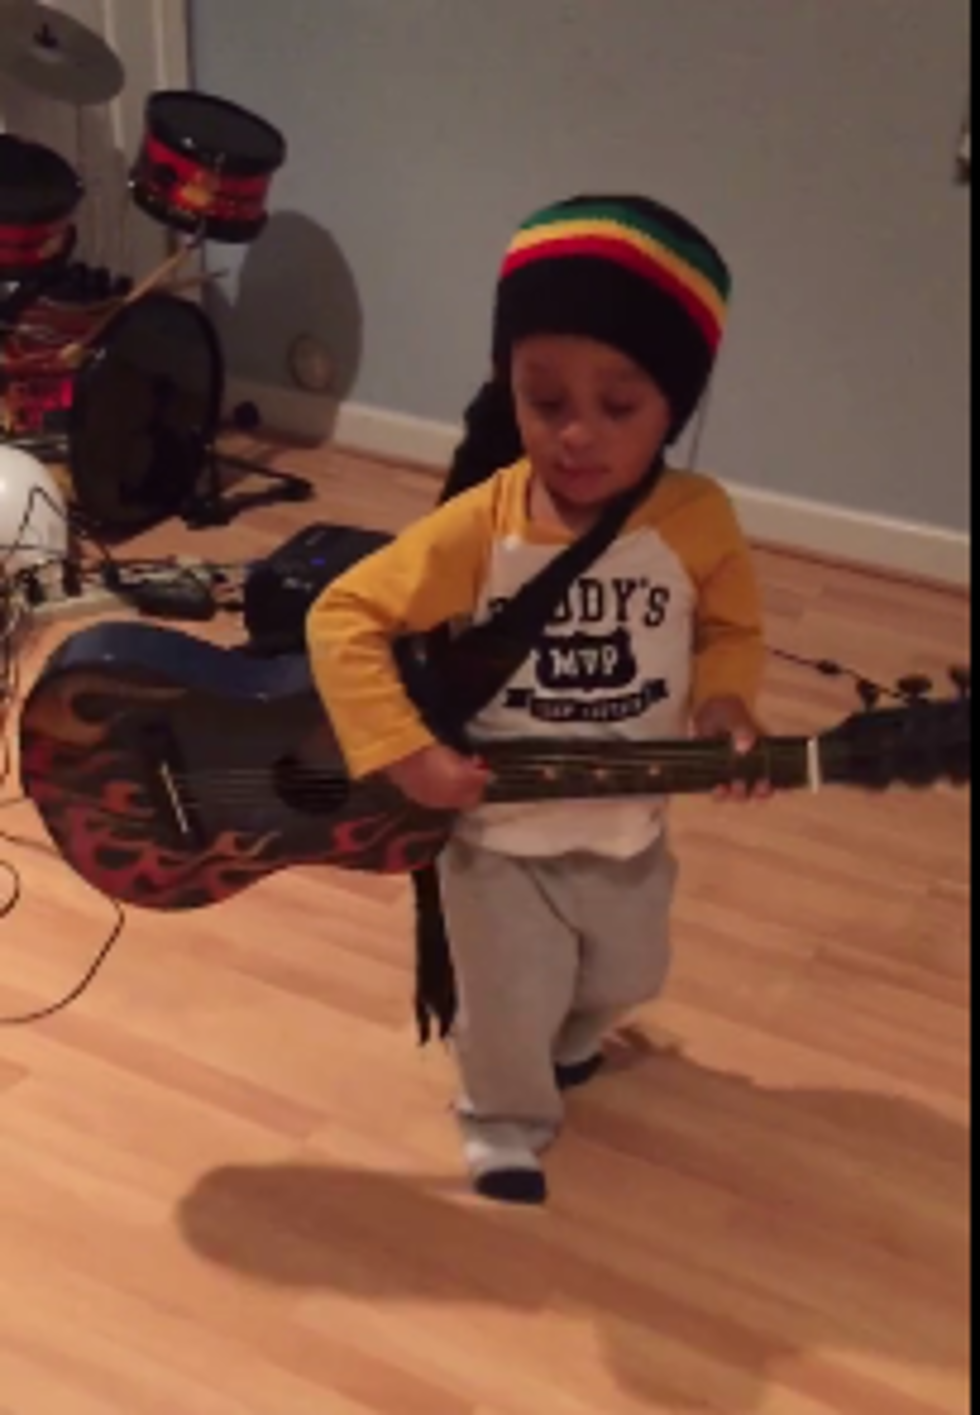 Adorable Two-Year-Old Does Awesome Bob Marley Performance [VIDEO]